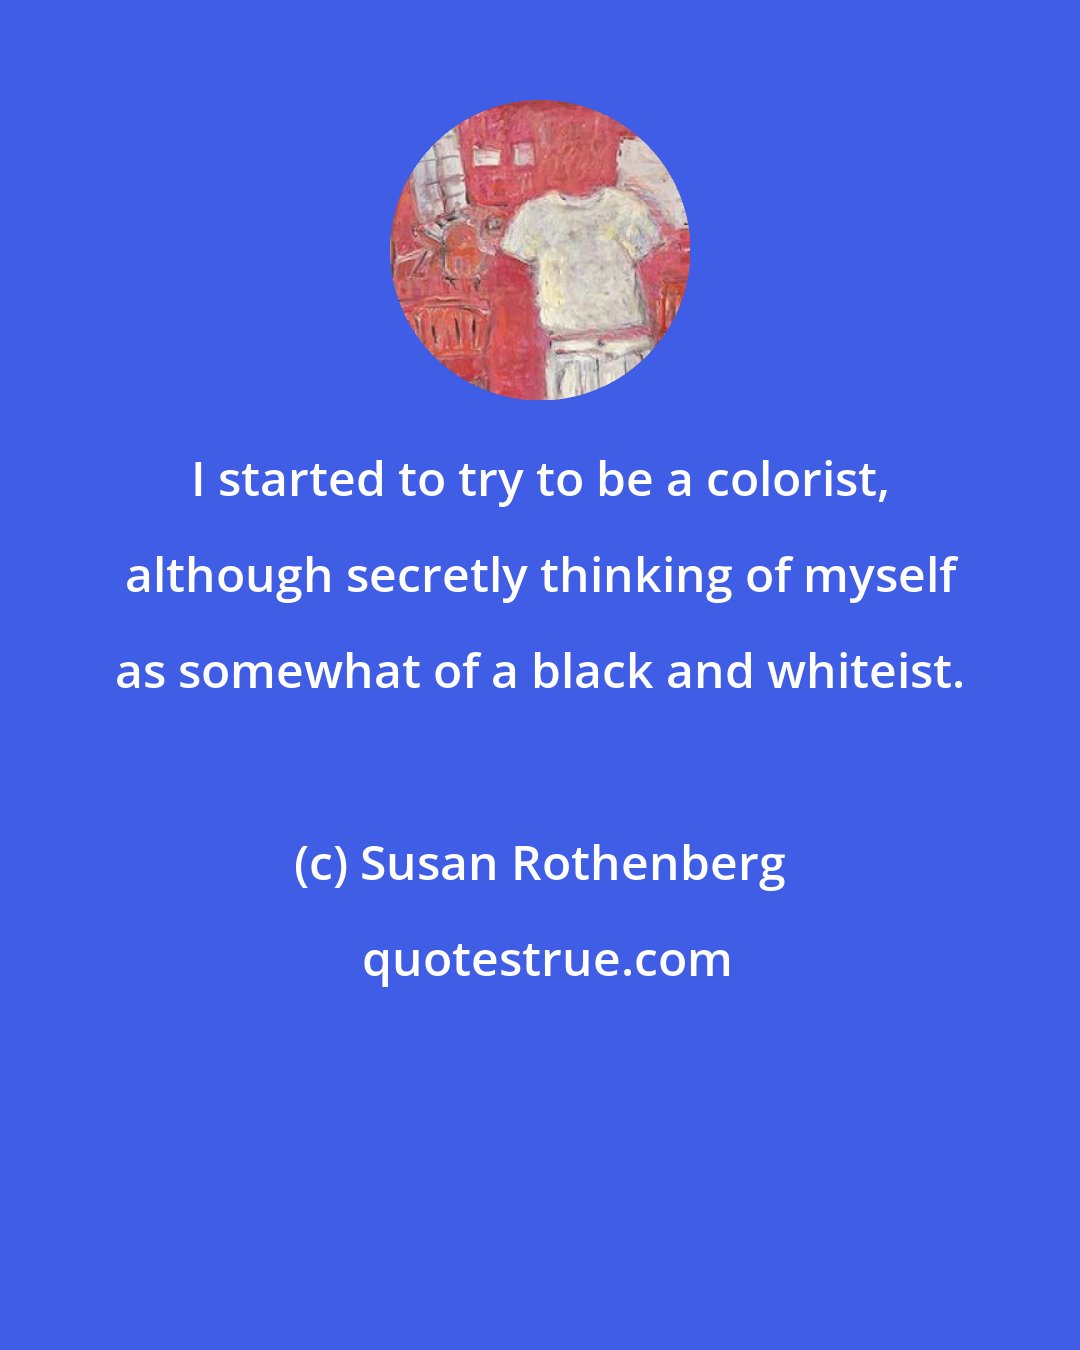 Susan Rothenberg: I started to try to be a colorist, although secretly thinking of myself as somewhat of a black and whiteist.